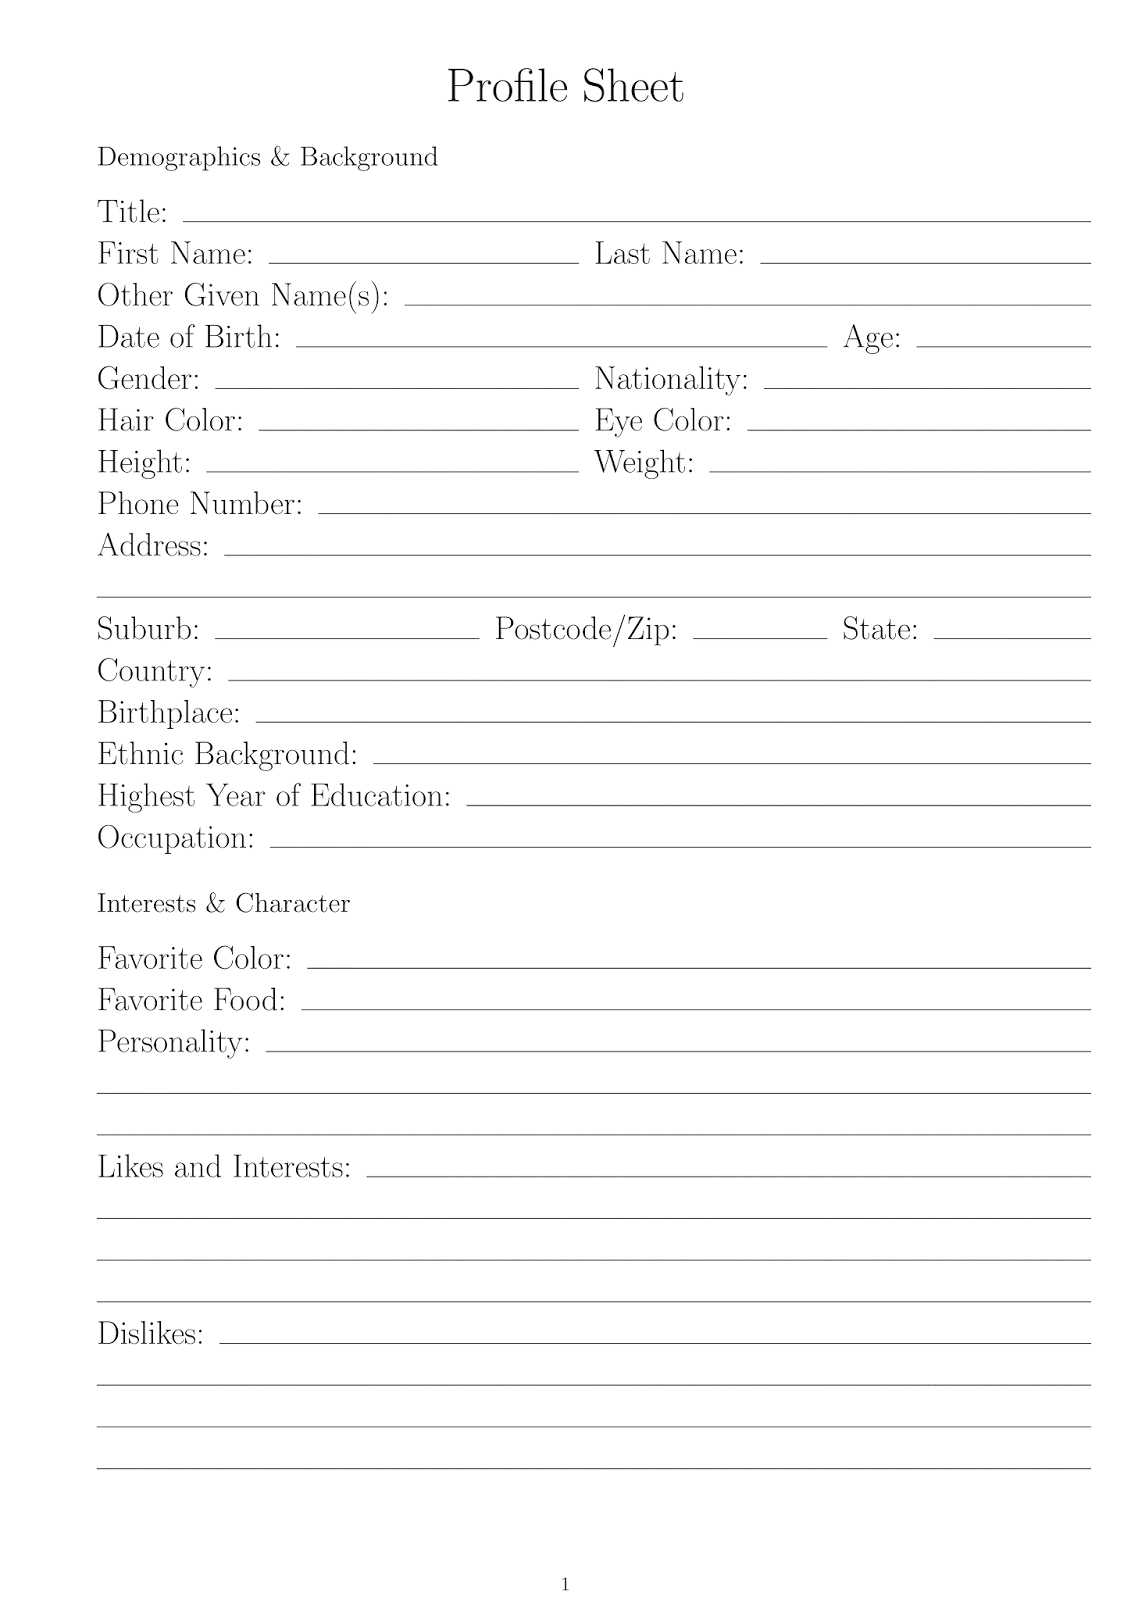 Character Education Worksheets Pdf as Well as Character Profile Sheet Extramaster